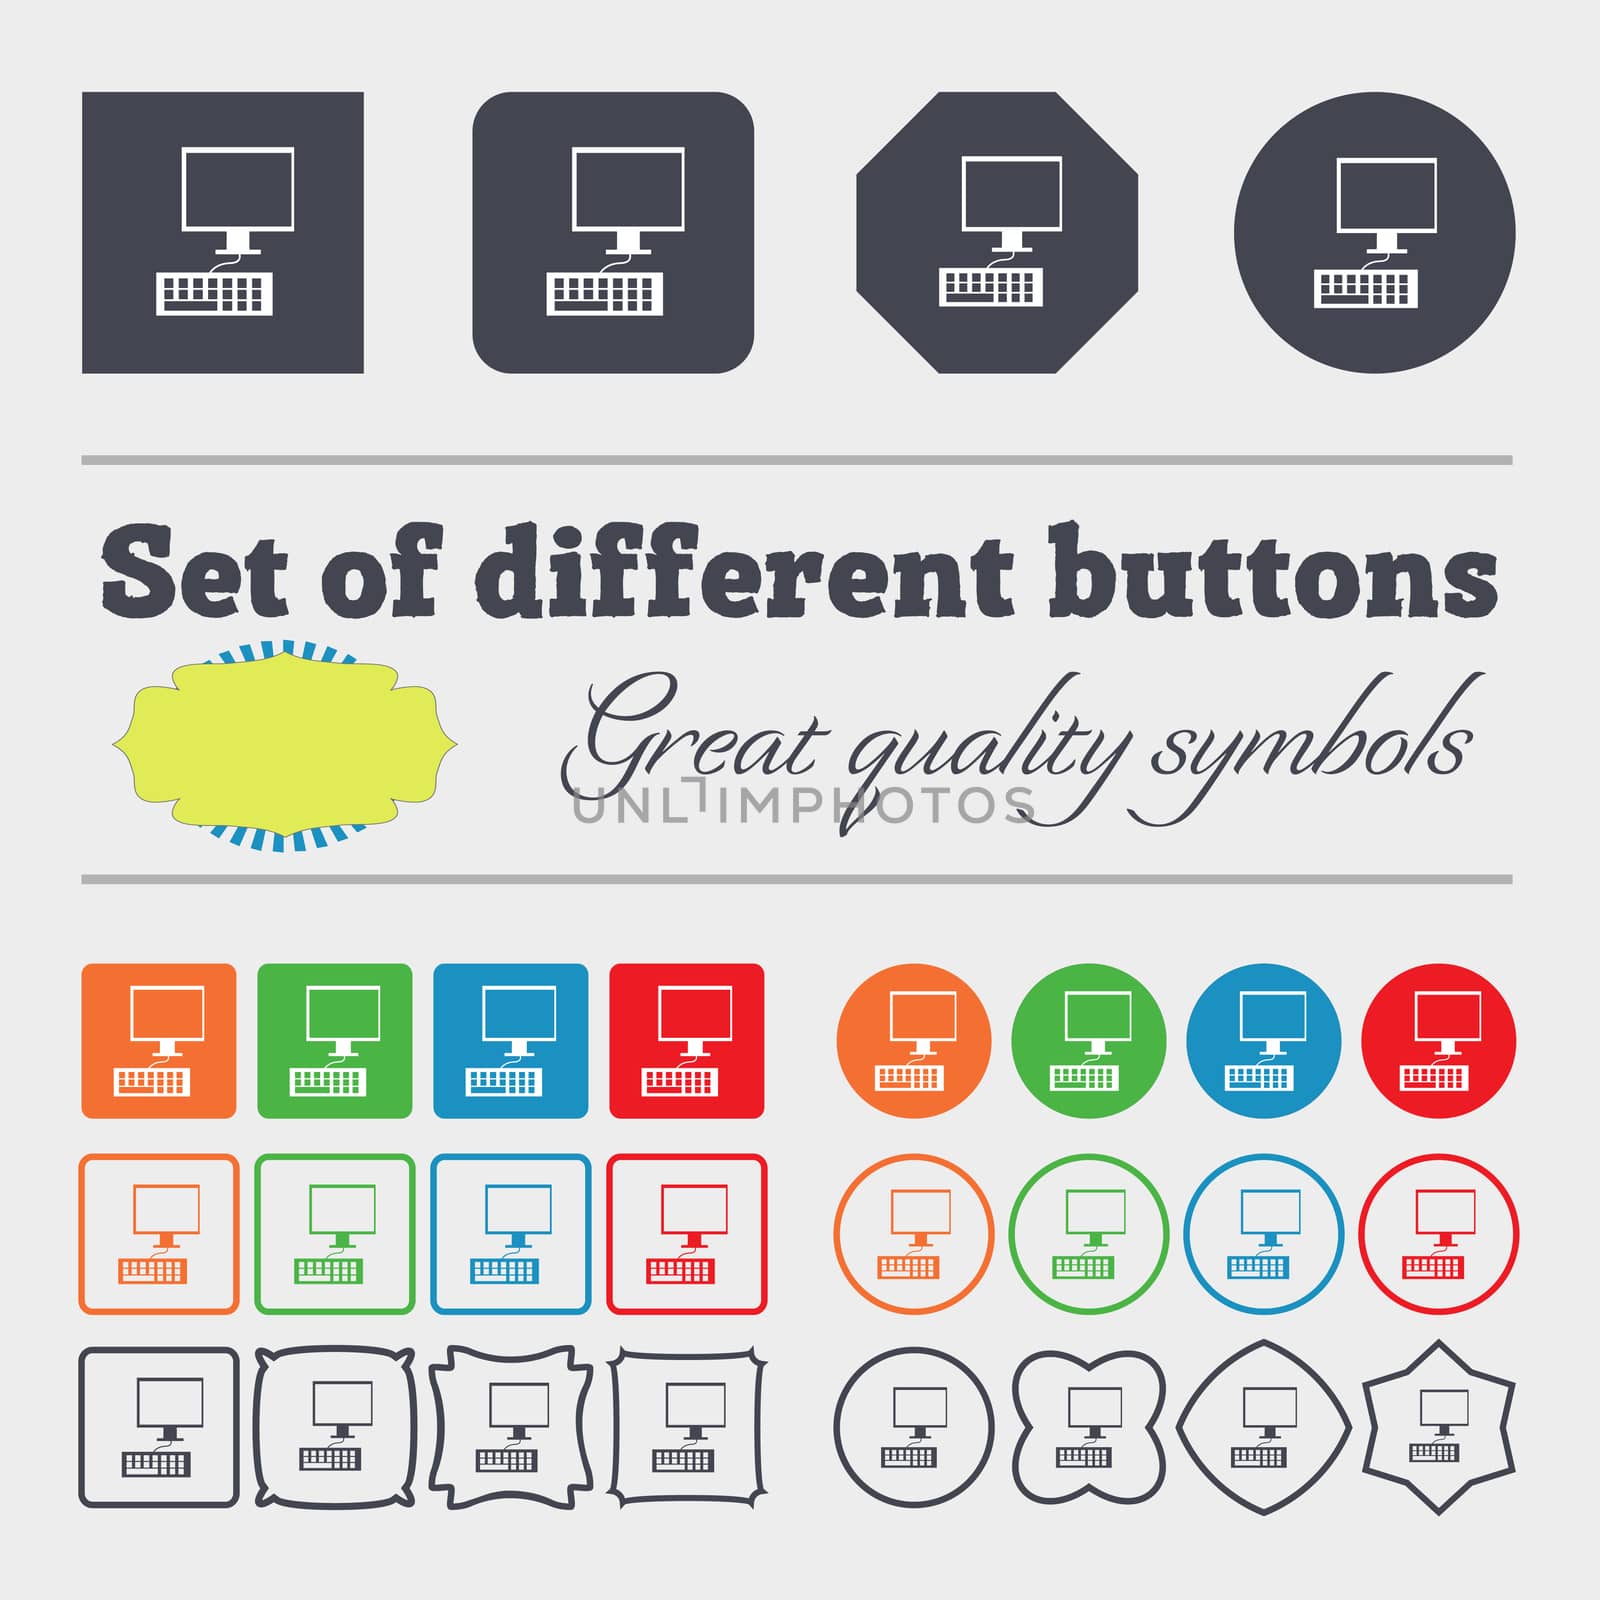 Computer monitor and keyboard Icon. Big set of colorful, diverse, high-quality buttons. illustration